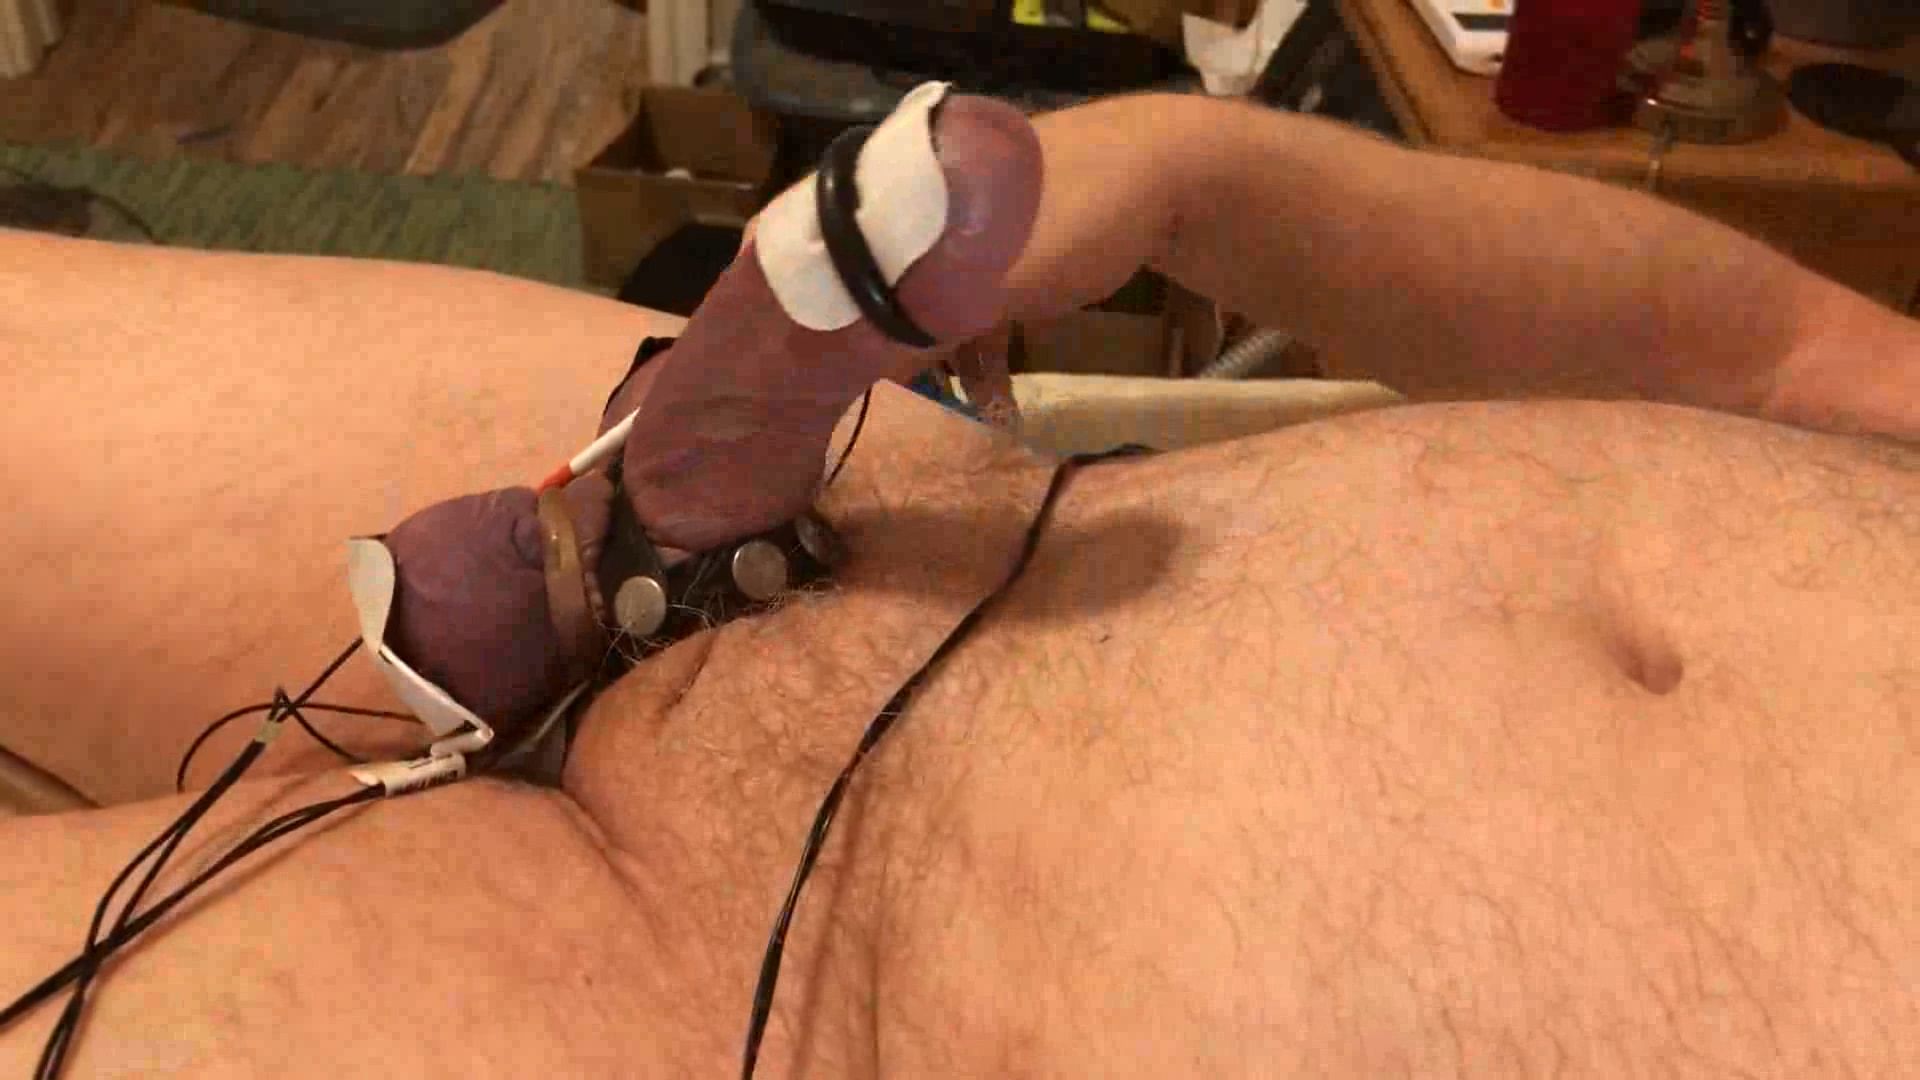 Cock twitches with estim pulse and precum flows as I slap an #35